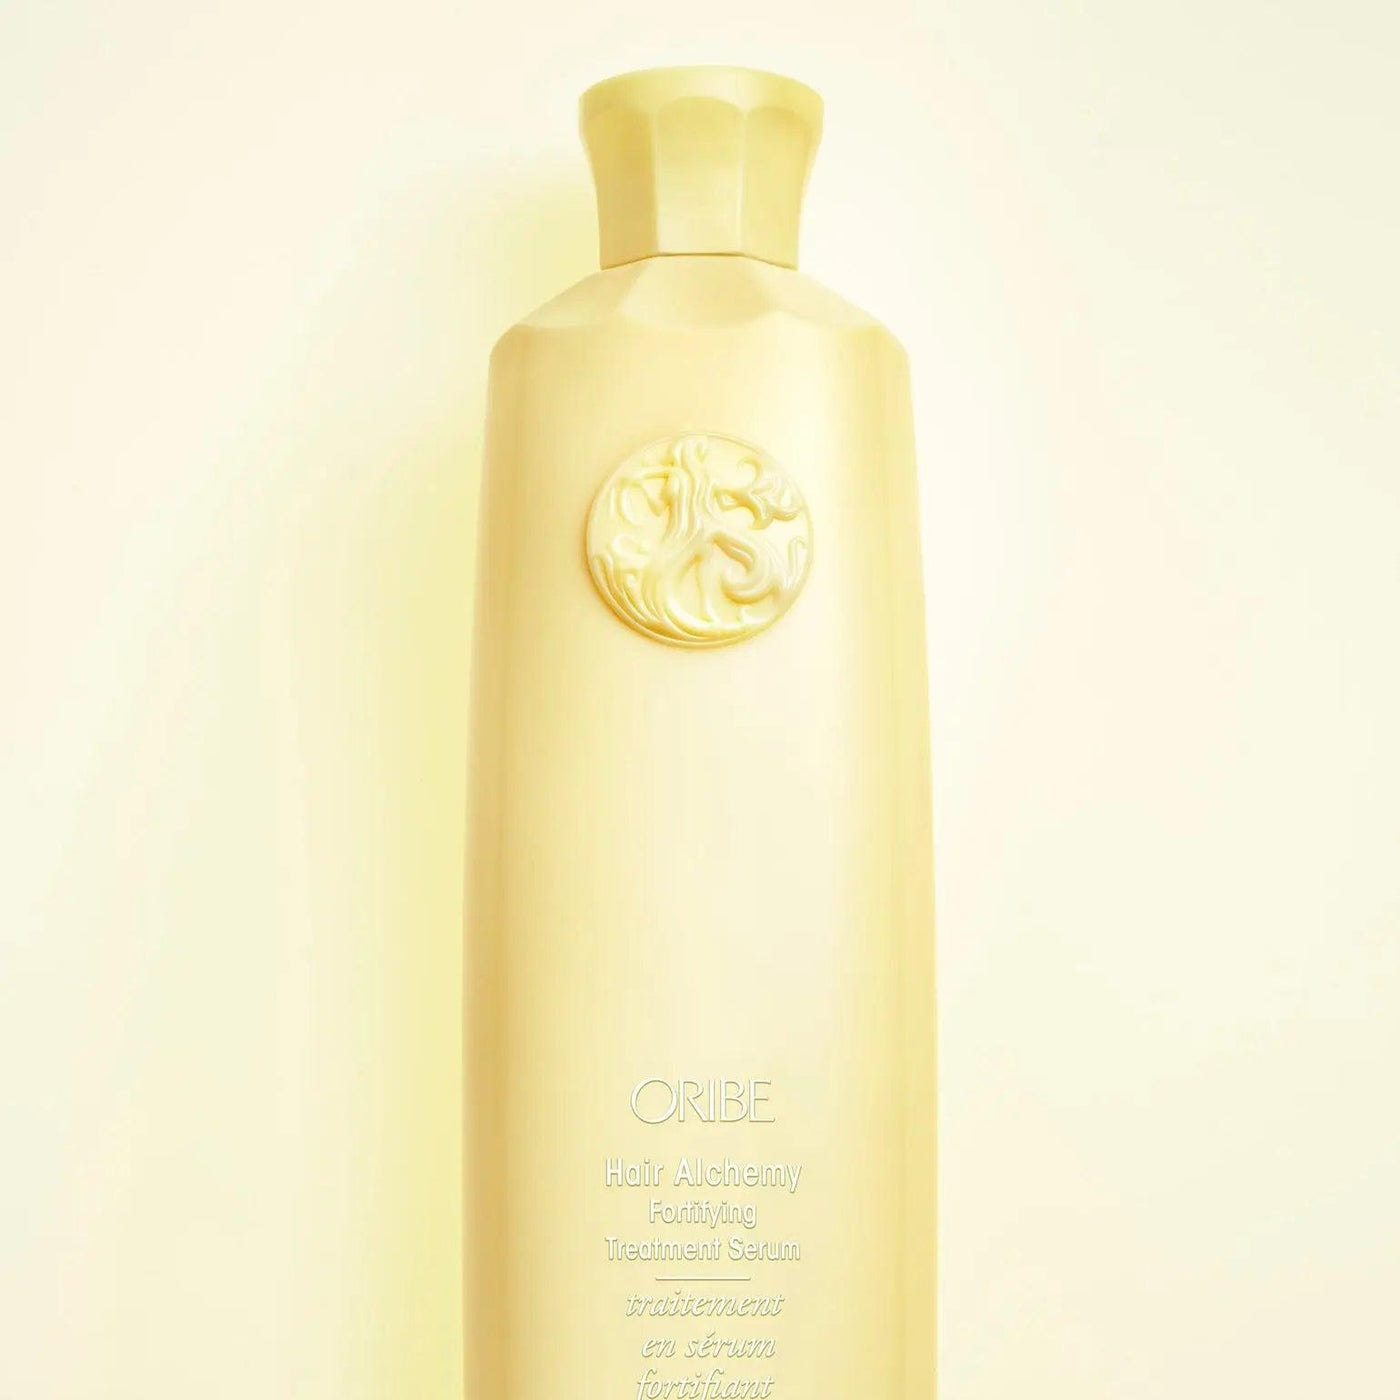 Hair Alchemy Fortifying Treatment Serum Oribe Boutique Deauville